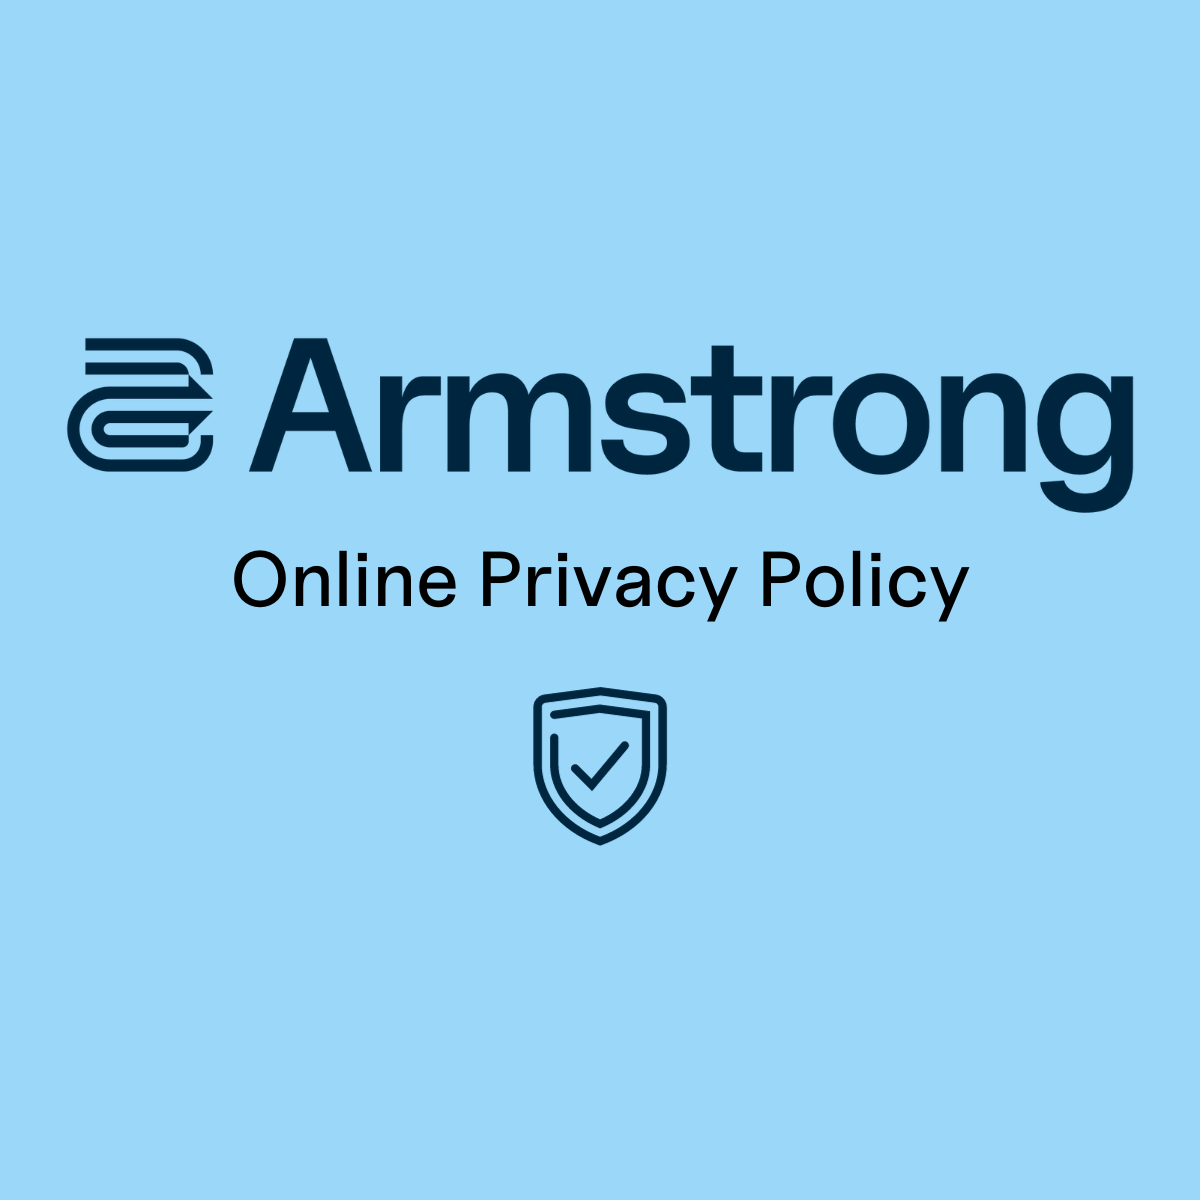 Online Privacy Policy